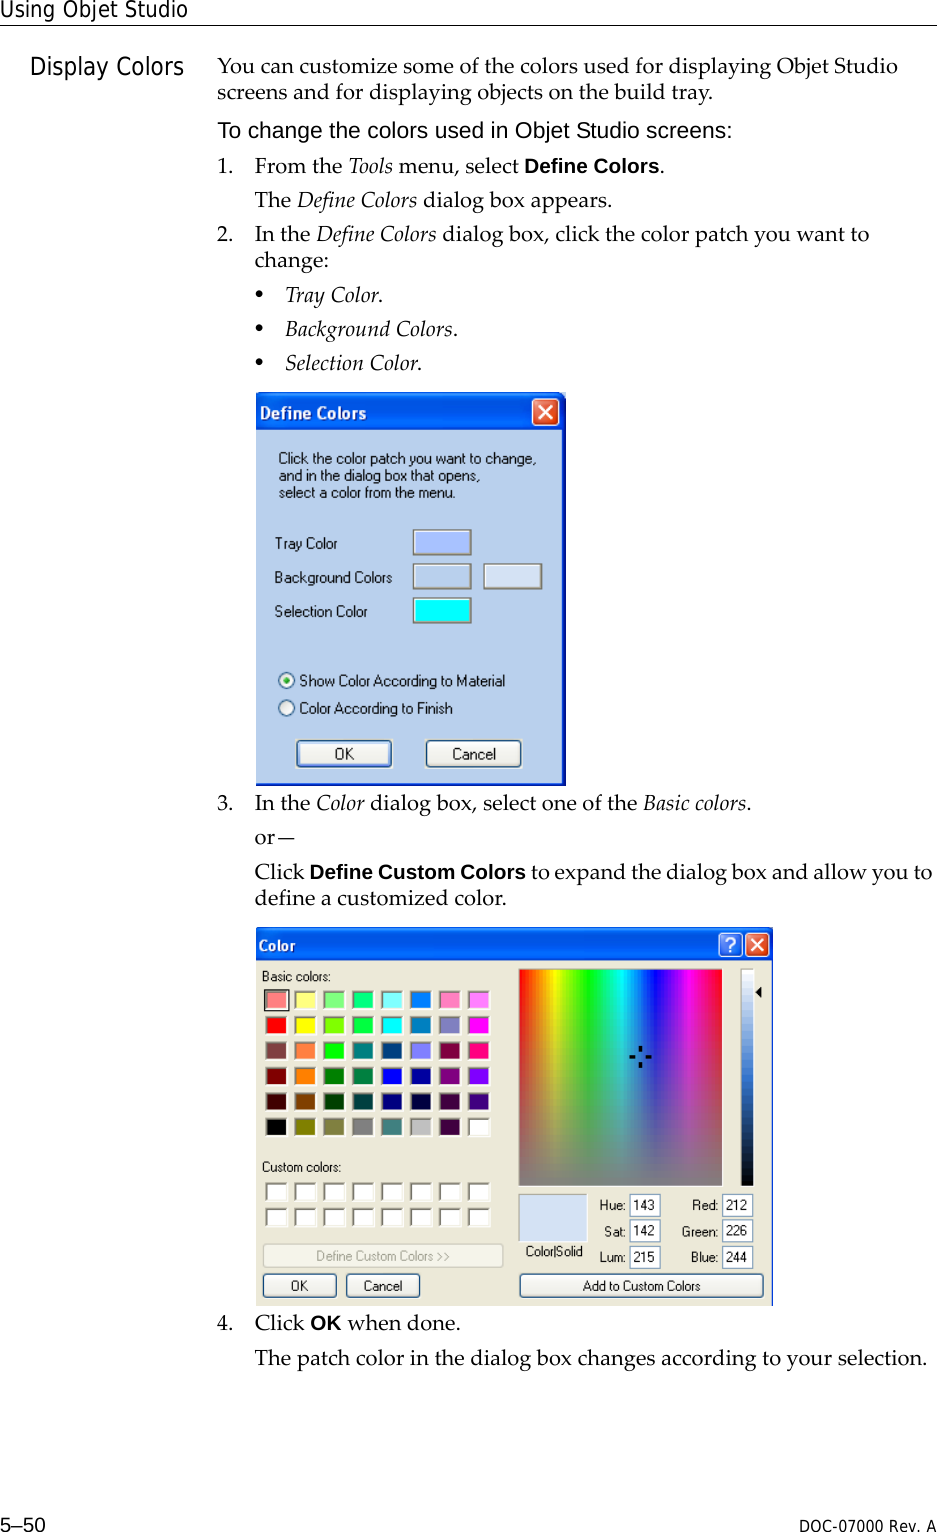 Using Objet Studio5–50 DOC-07000 Rev. ADisplay Colors YoucancustomizesomeofthecolorsusedfordisplayingObjetStudioscreensandfordisplayingobjectsonthebuildtray.To change the colors used in Objet Studio screens:1. FromtheToolsmenu,selectDefine Colors.TheDefineColorsdialogboxappears.2. IntheDefineColorsdialogbox,clickthecolorpatchyouwanttochange:•TrayColor.•BackgroundColors.•SelectionColor.3. IntheColordialogbox,selectoneoftheBasiccolors.or—ClickDefine Custom Colorstoexpandthedialogboxandallowyoutodefineacustomizedcolor.4. ClickOK whendone.Thepatchcolorinthedialogboxchangesaccordingtoyourselection.